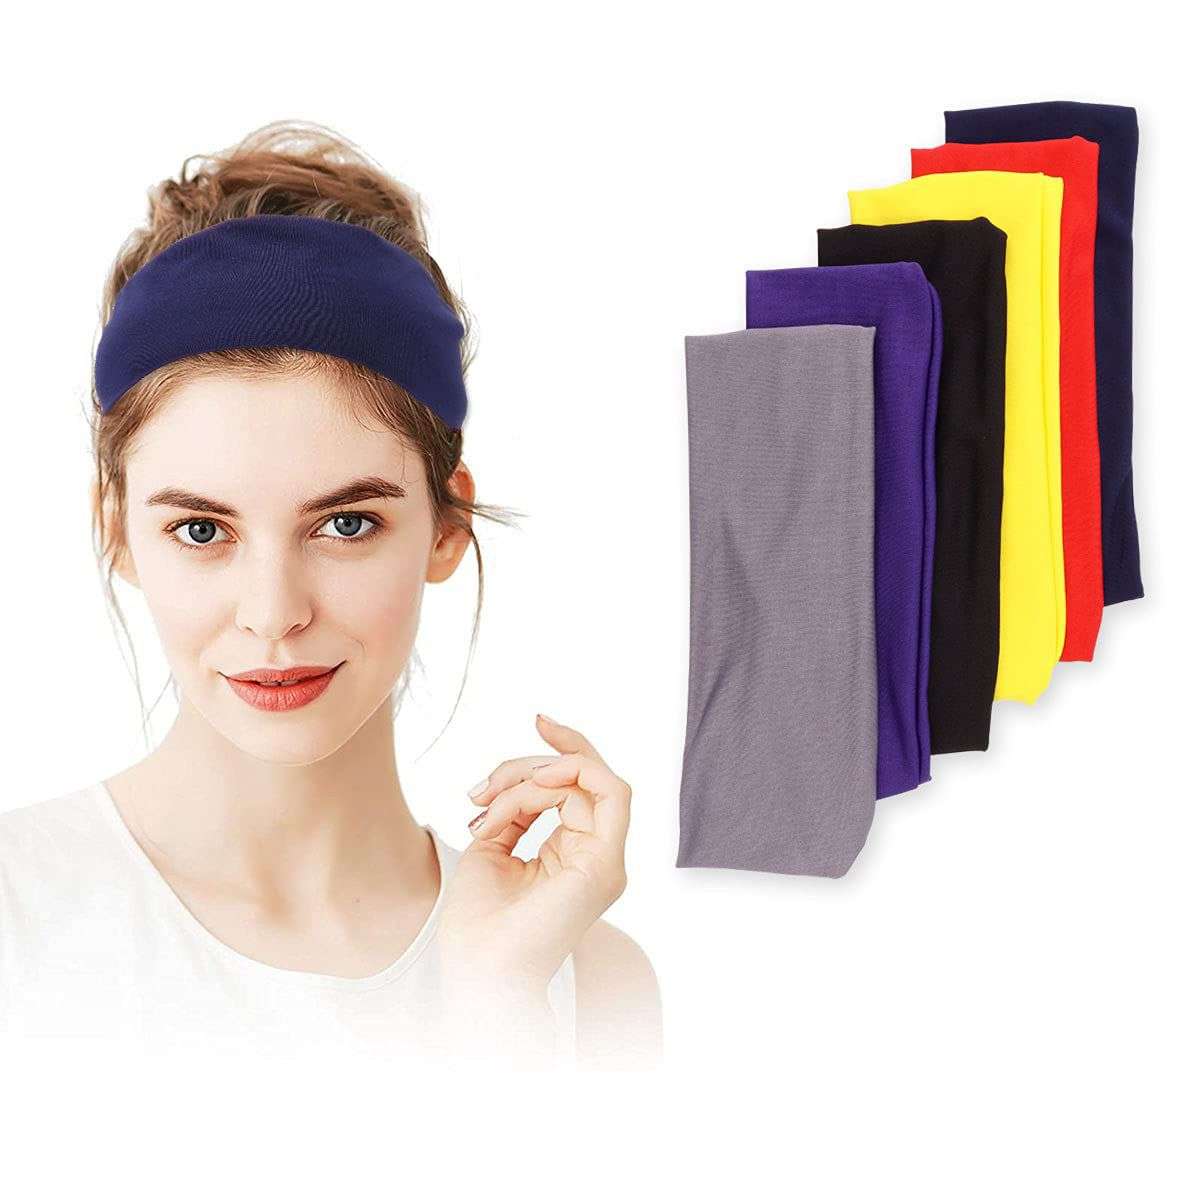 TERSE Workout Headbands for Women Non Slip Sweatbands Hair Band's for Women  Athletic Hair Sports Yoga Running Moisture Wicking Head Band